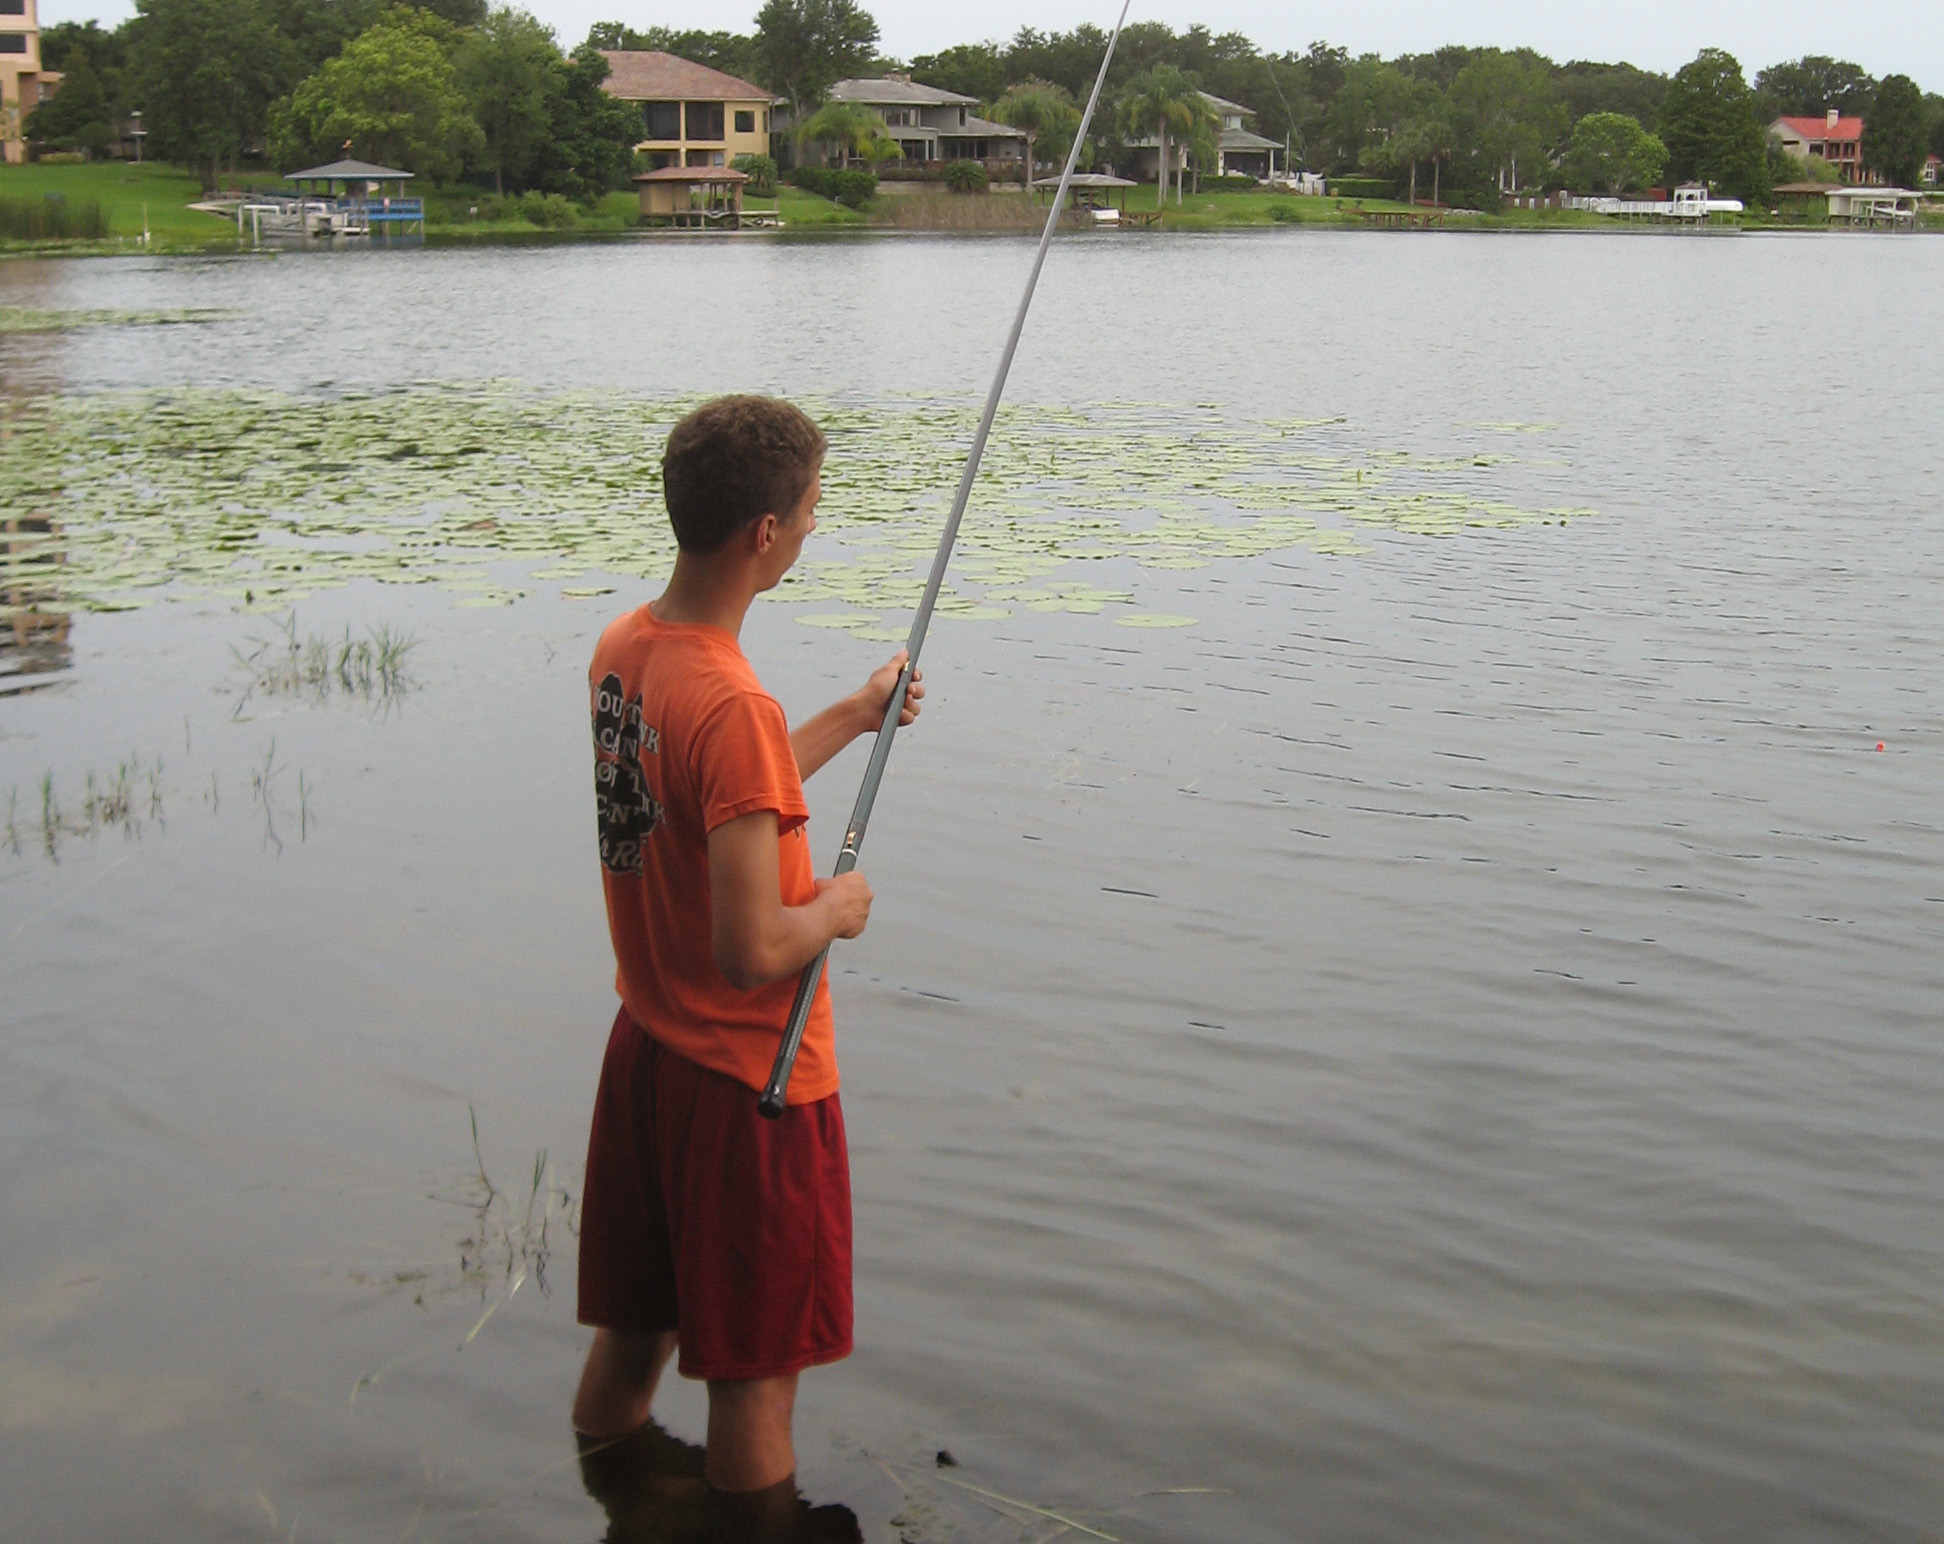 Cane Pole Fishing: How to Build and Rig a Pole